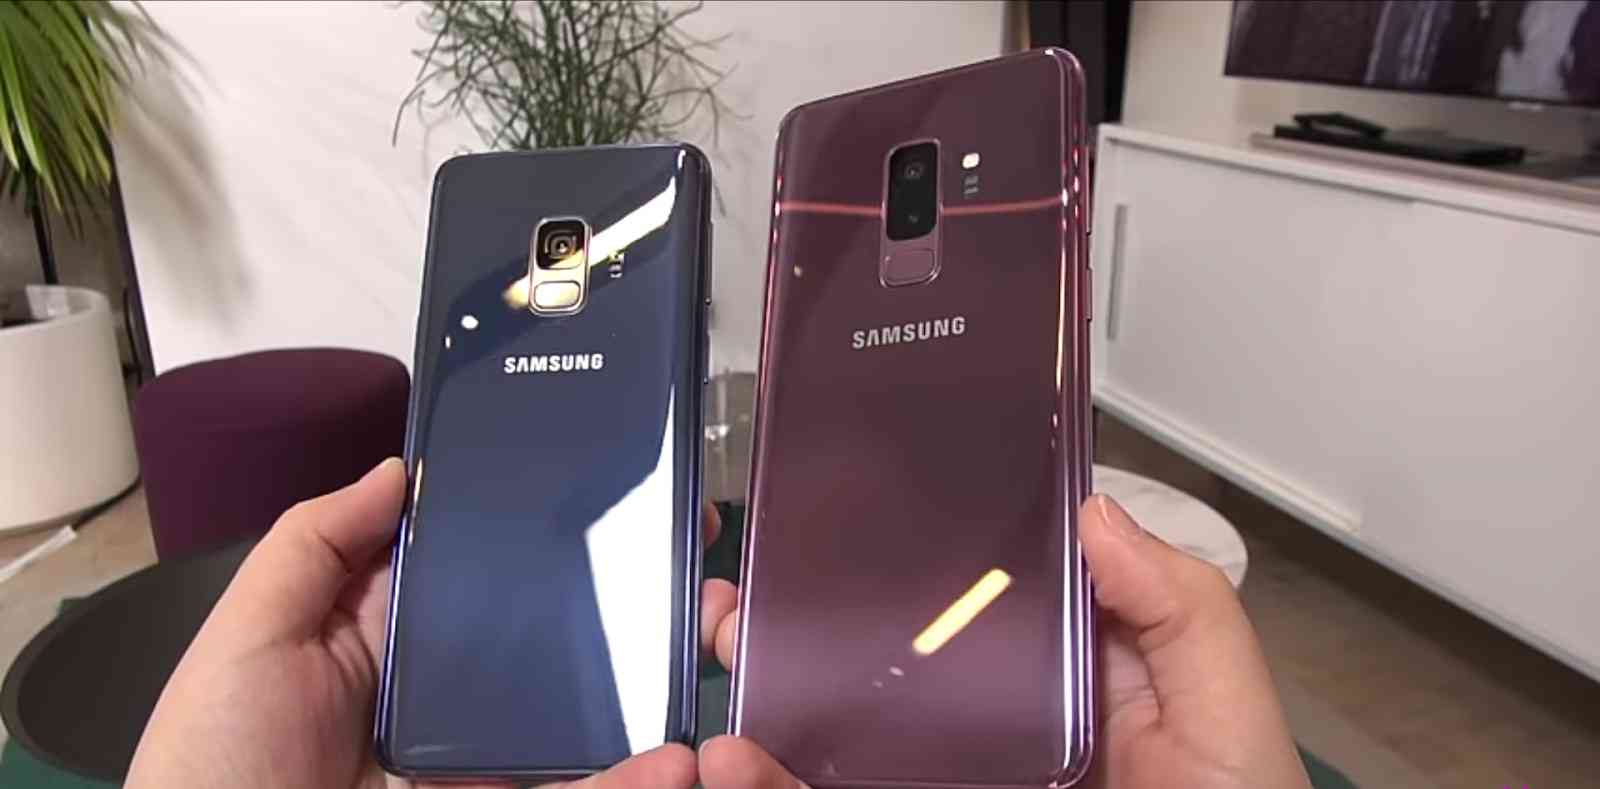 Back View Of The Samsung Galaxy S9 and S9 Plus smart phones